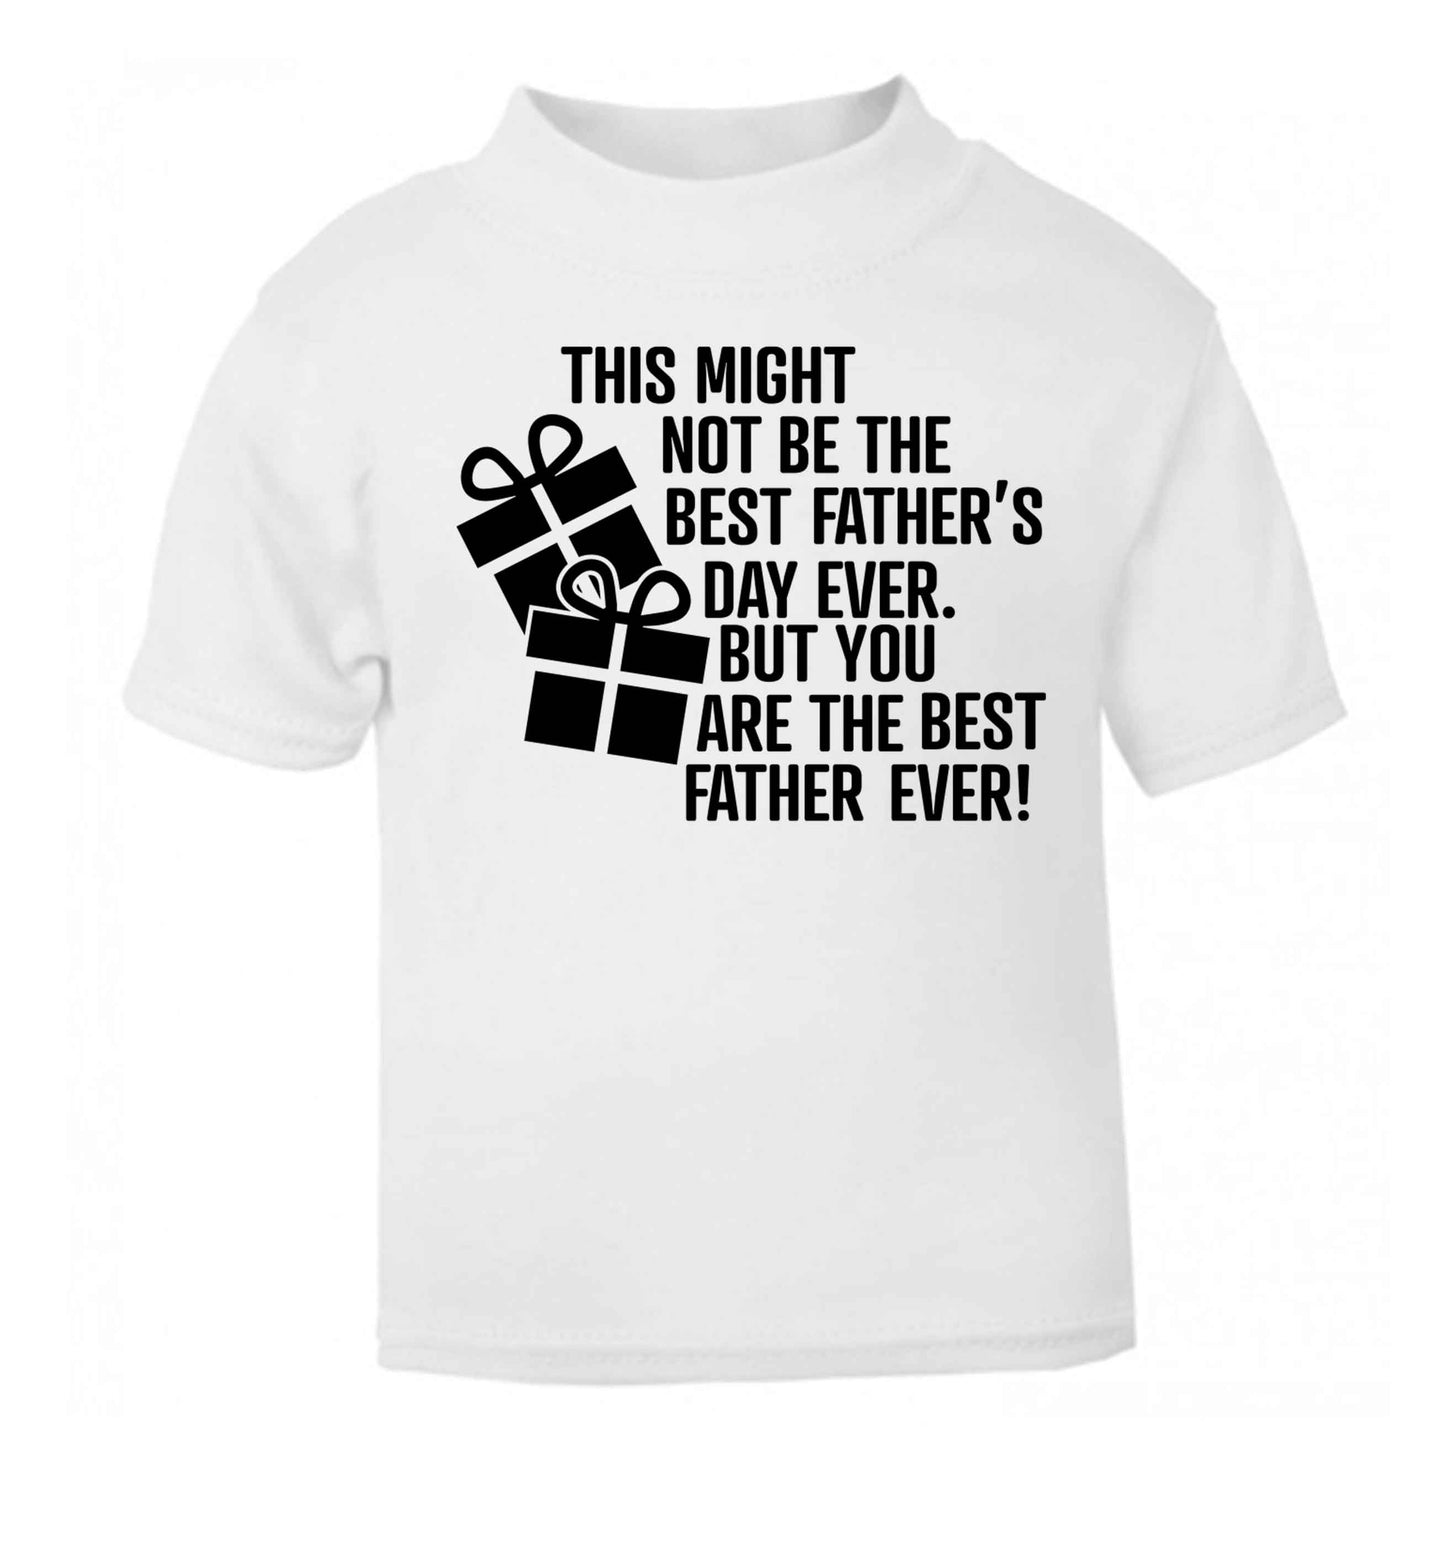 It might not be the best Father's Day ever but you are the best father ever! white baby toddler Tshirt 2 Years